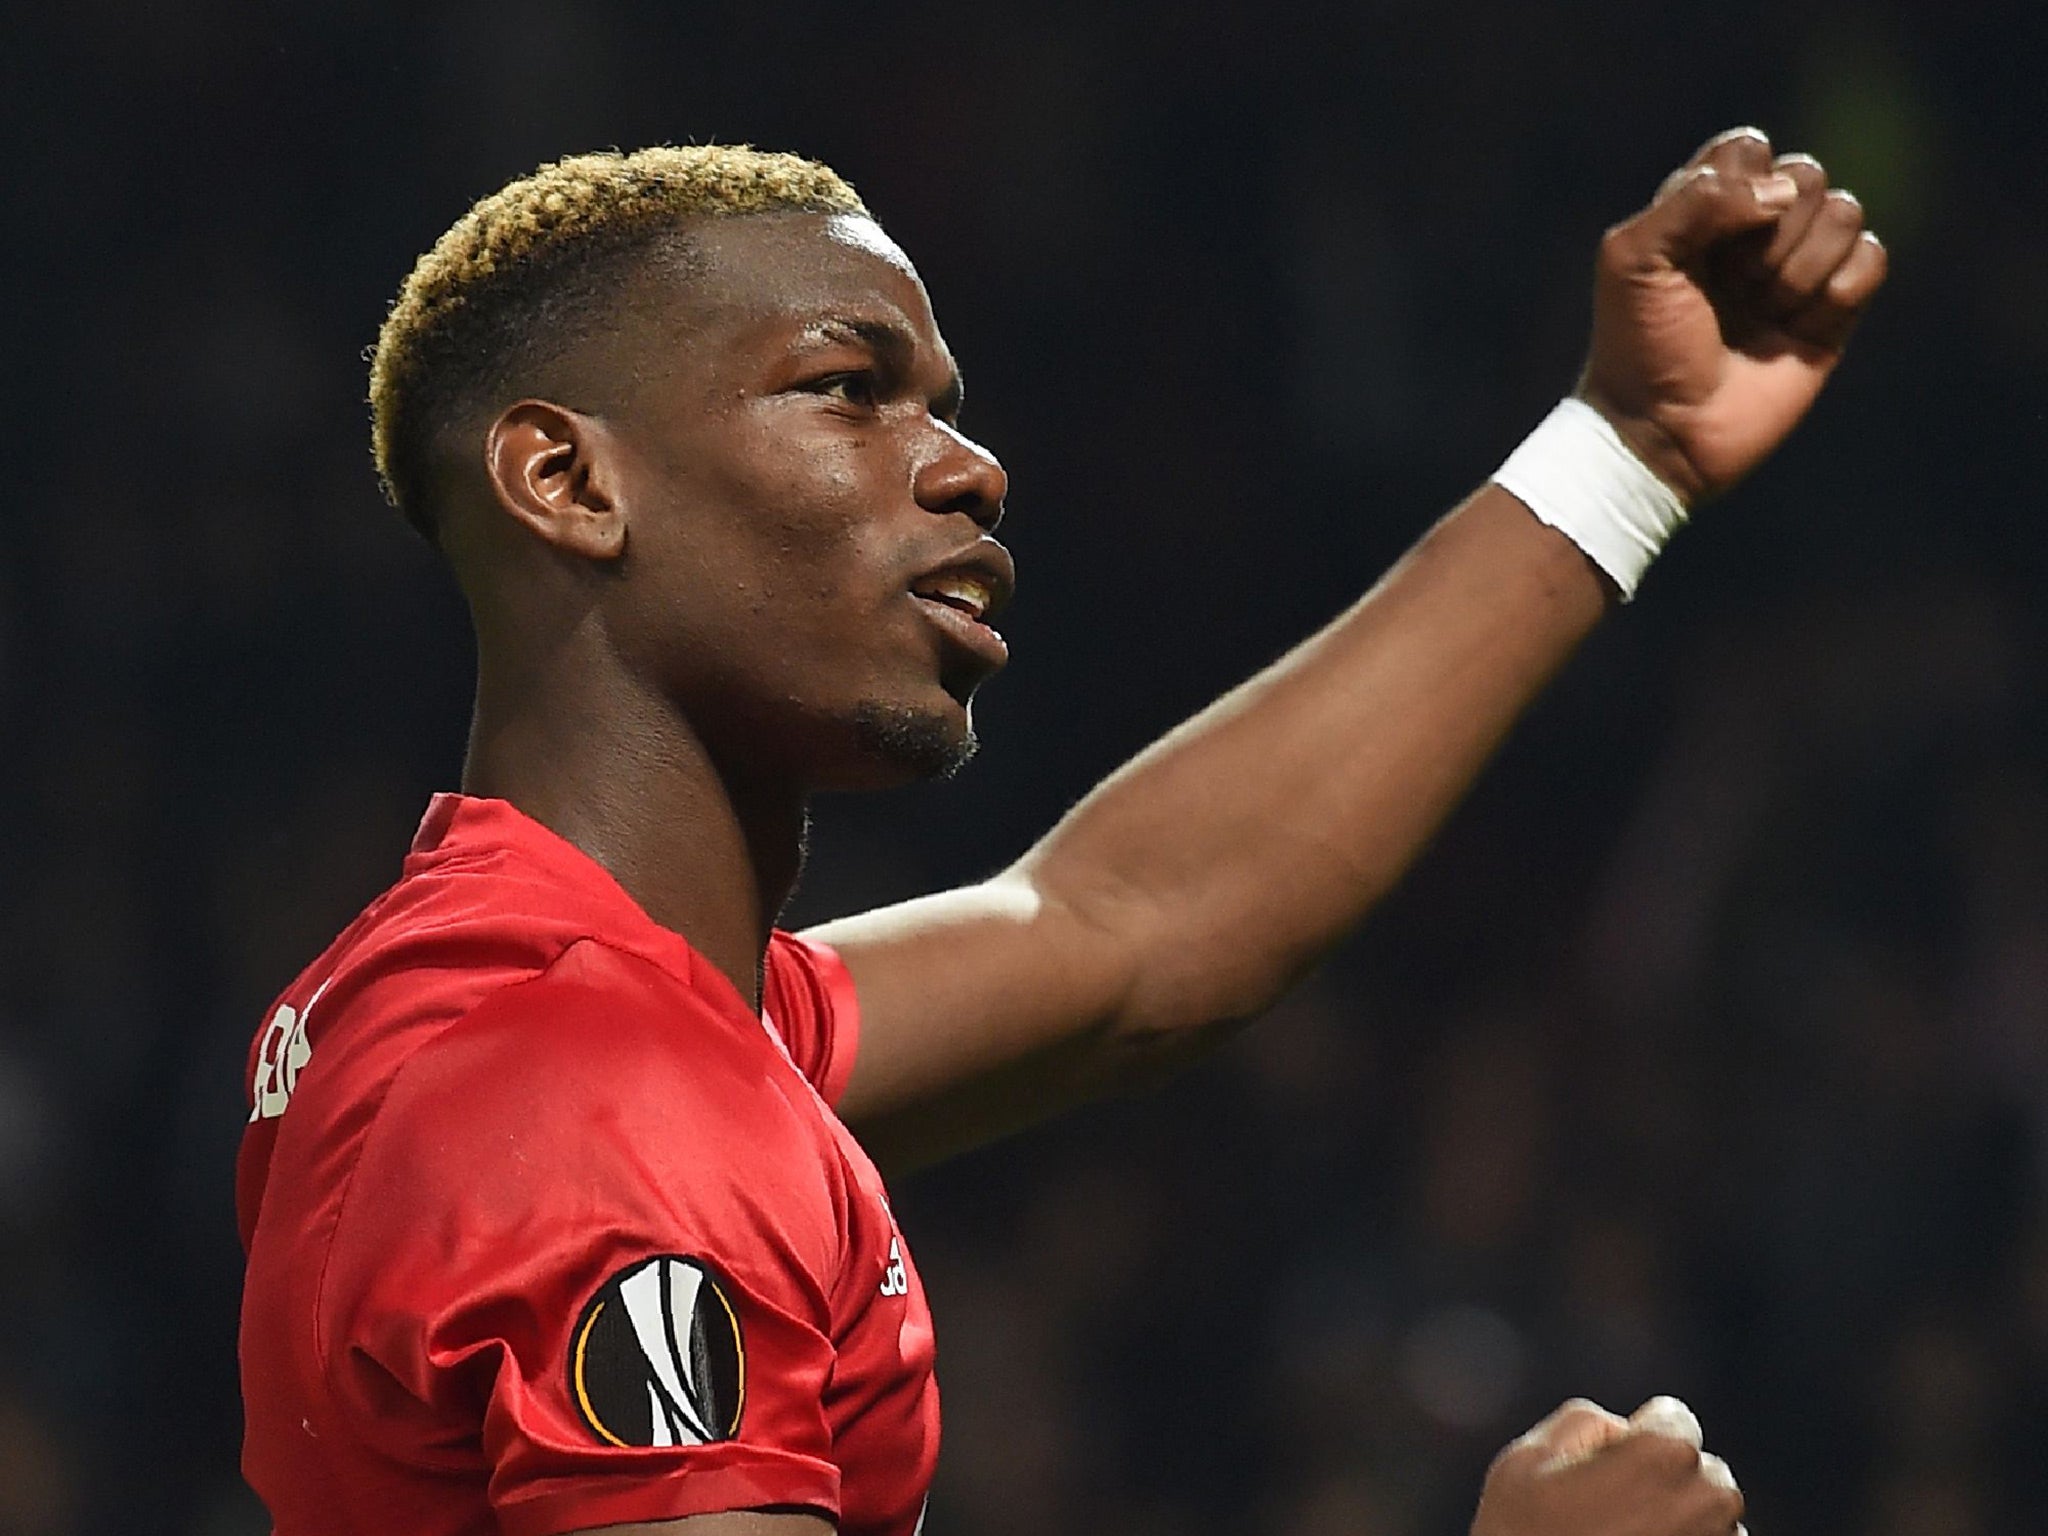 Paul Pogba and his team-mates will face Ajax in the final later this month